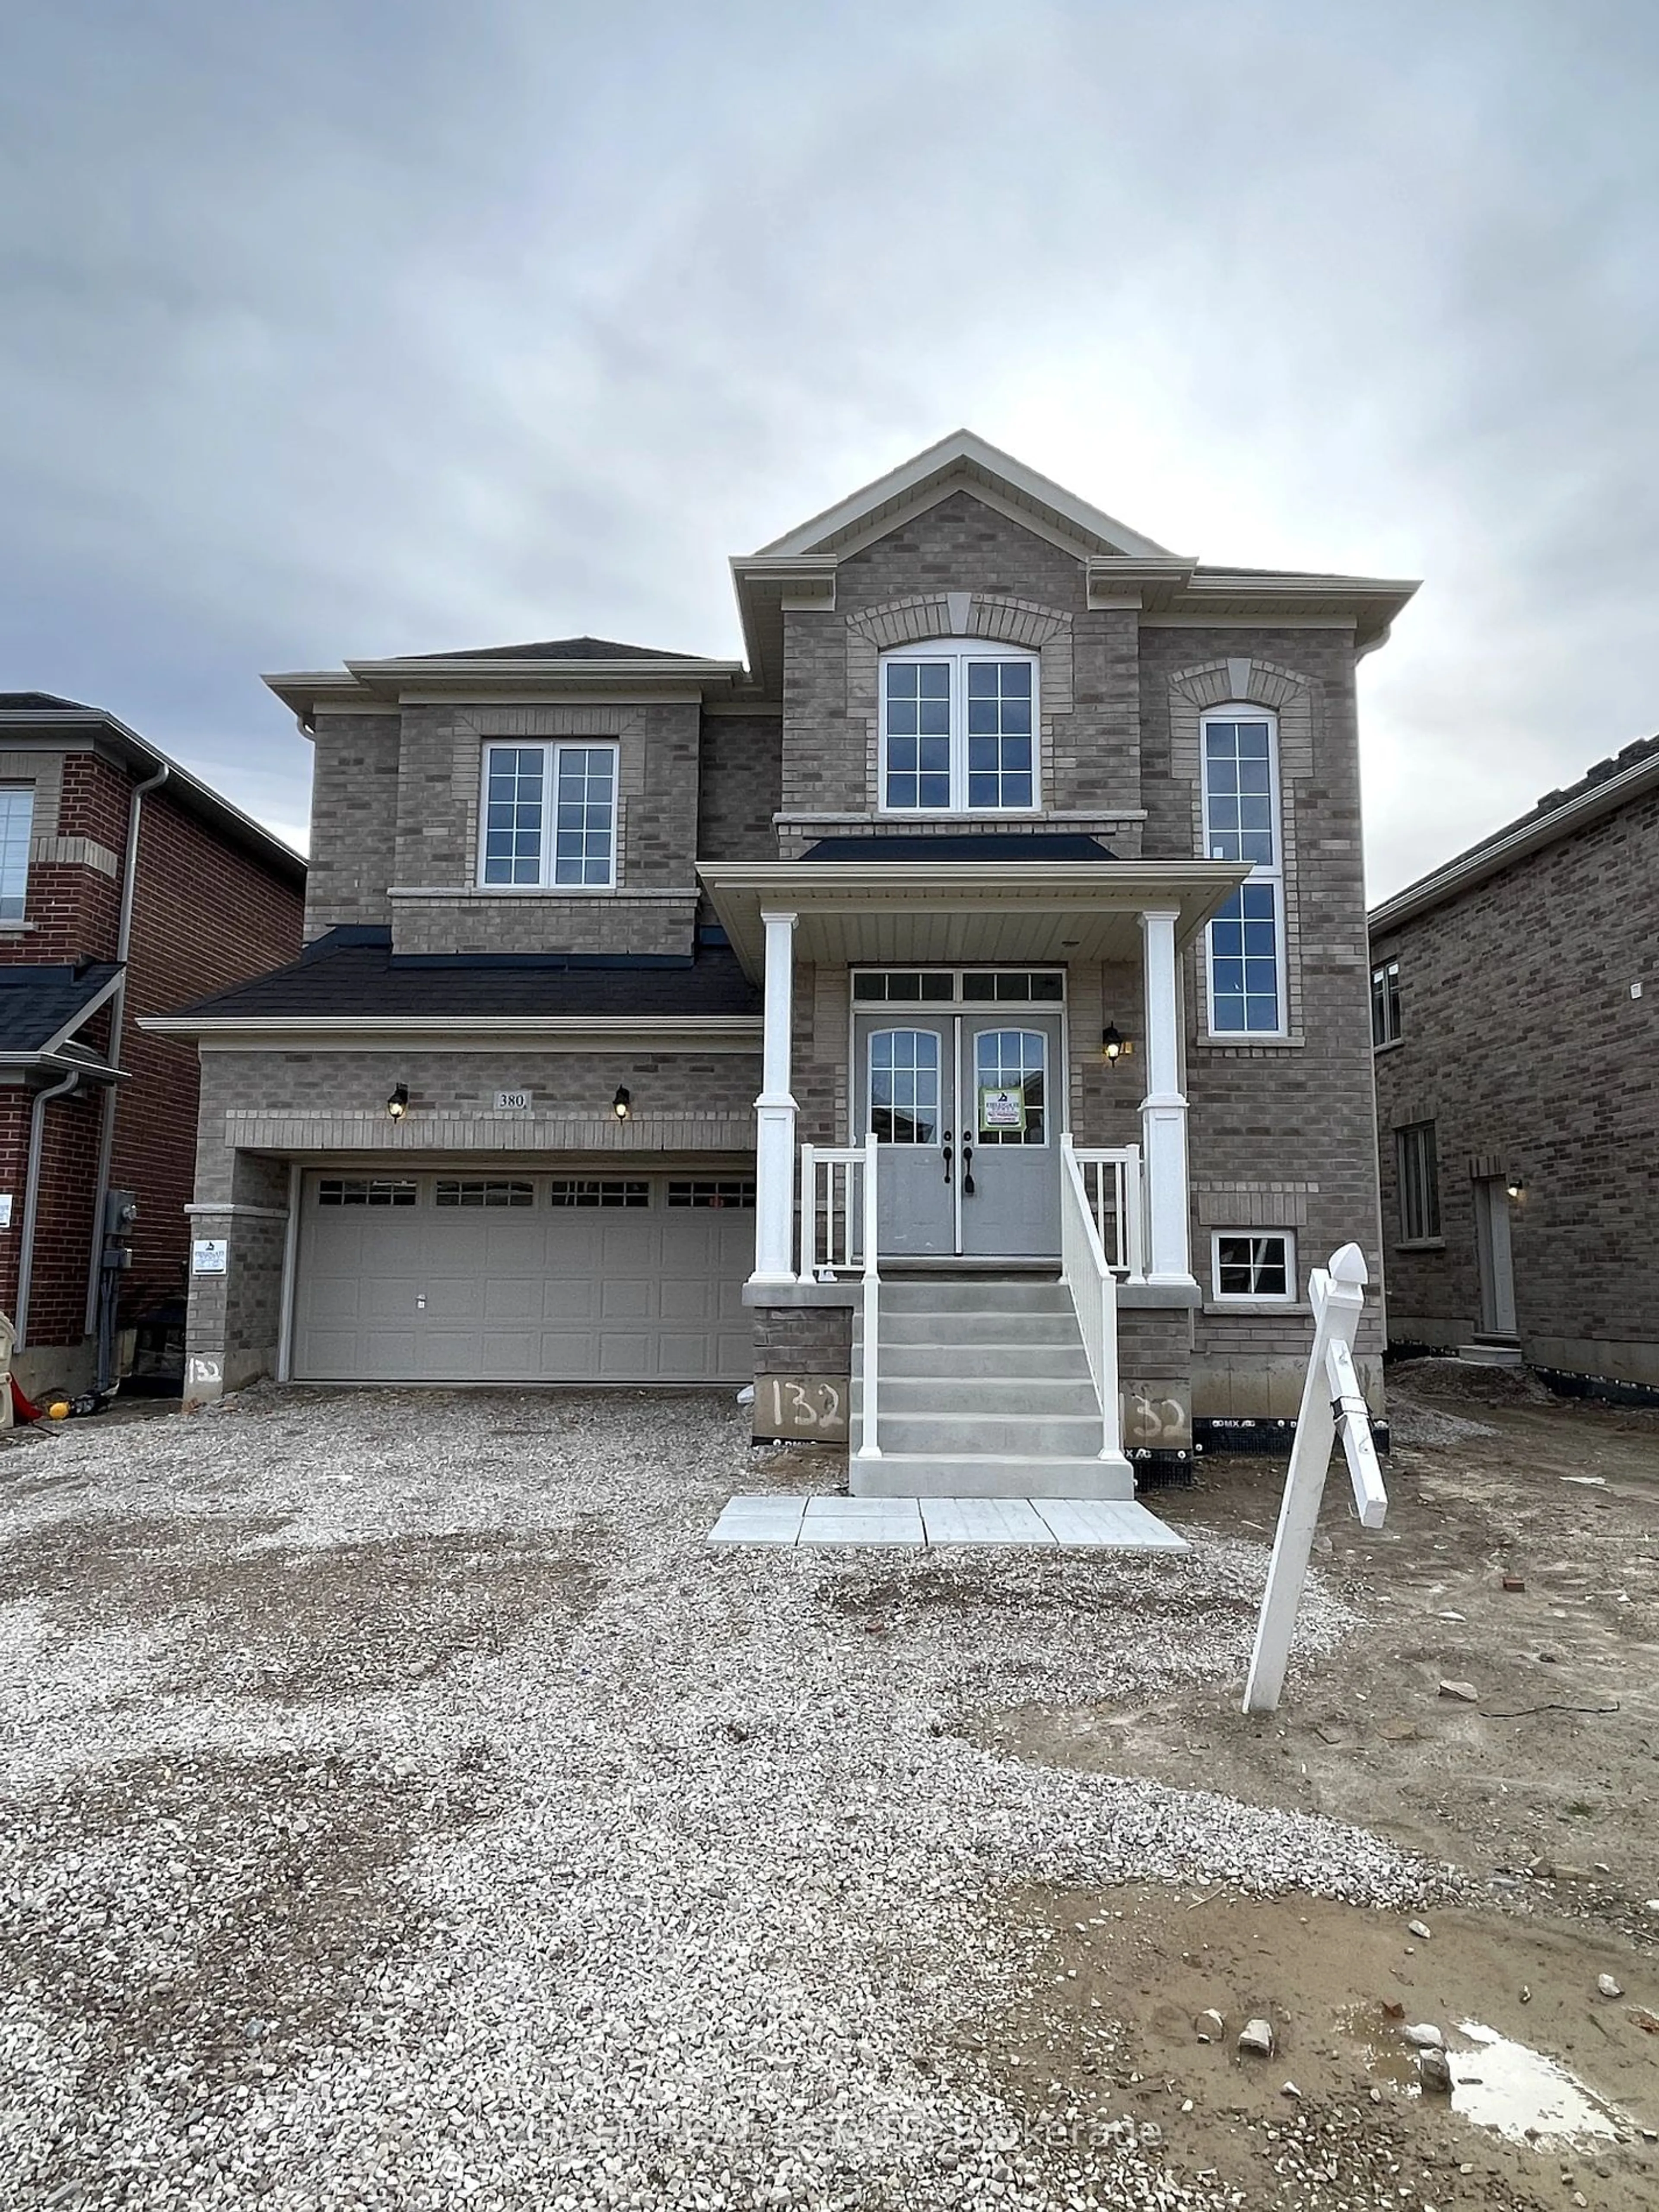 Home with brick exterior material for 380 Leanne Lane, Shelburne Ontario L9V 3Y6